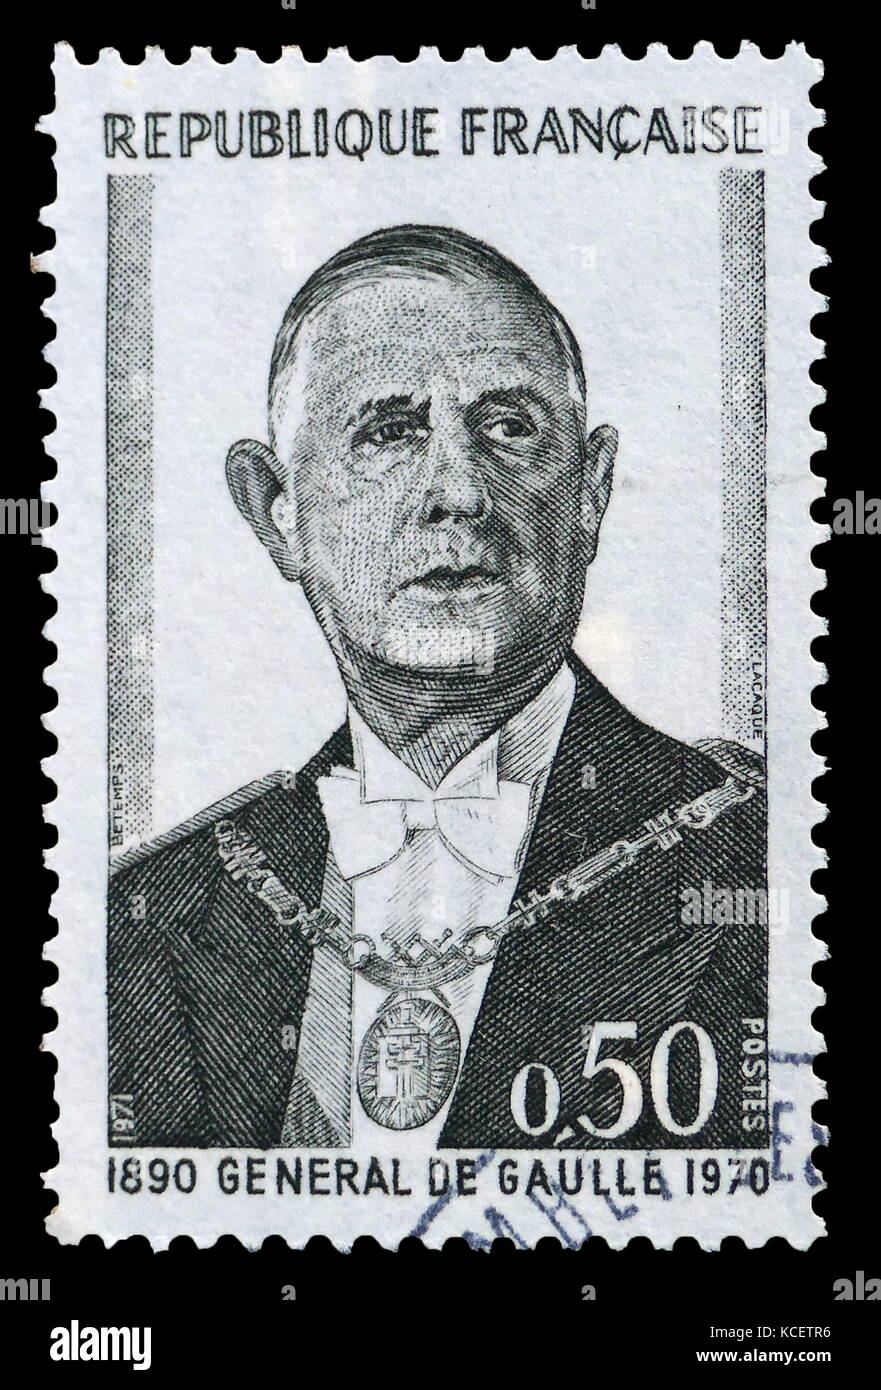 Charles de Gaulle (1890 – 1970); French general and statesman. He was the leader of Free France (1940–44) and the head of the Provisional Government of the French Republic (1944–46). In 1958, he founded the Fifth Republic and was elected as the 18th President of France, a position he held until his resignation in 1969 Stock Photo